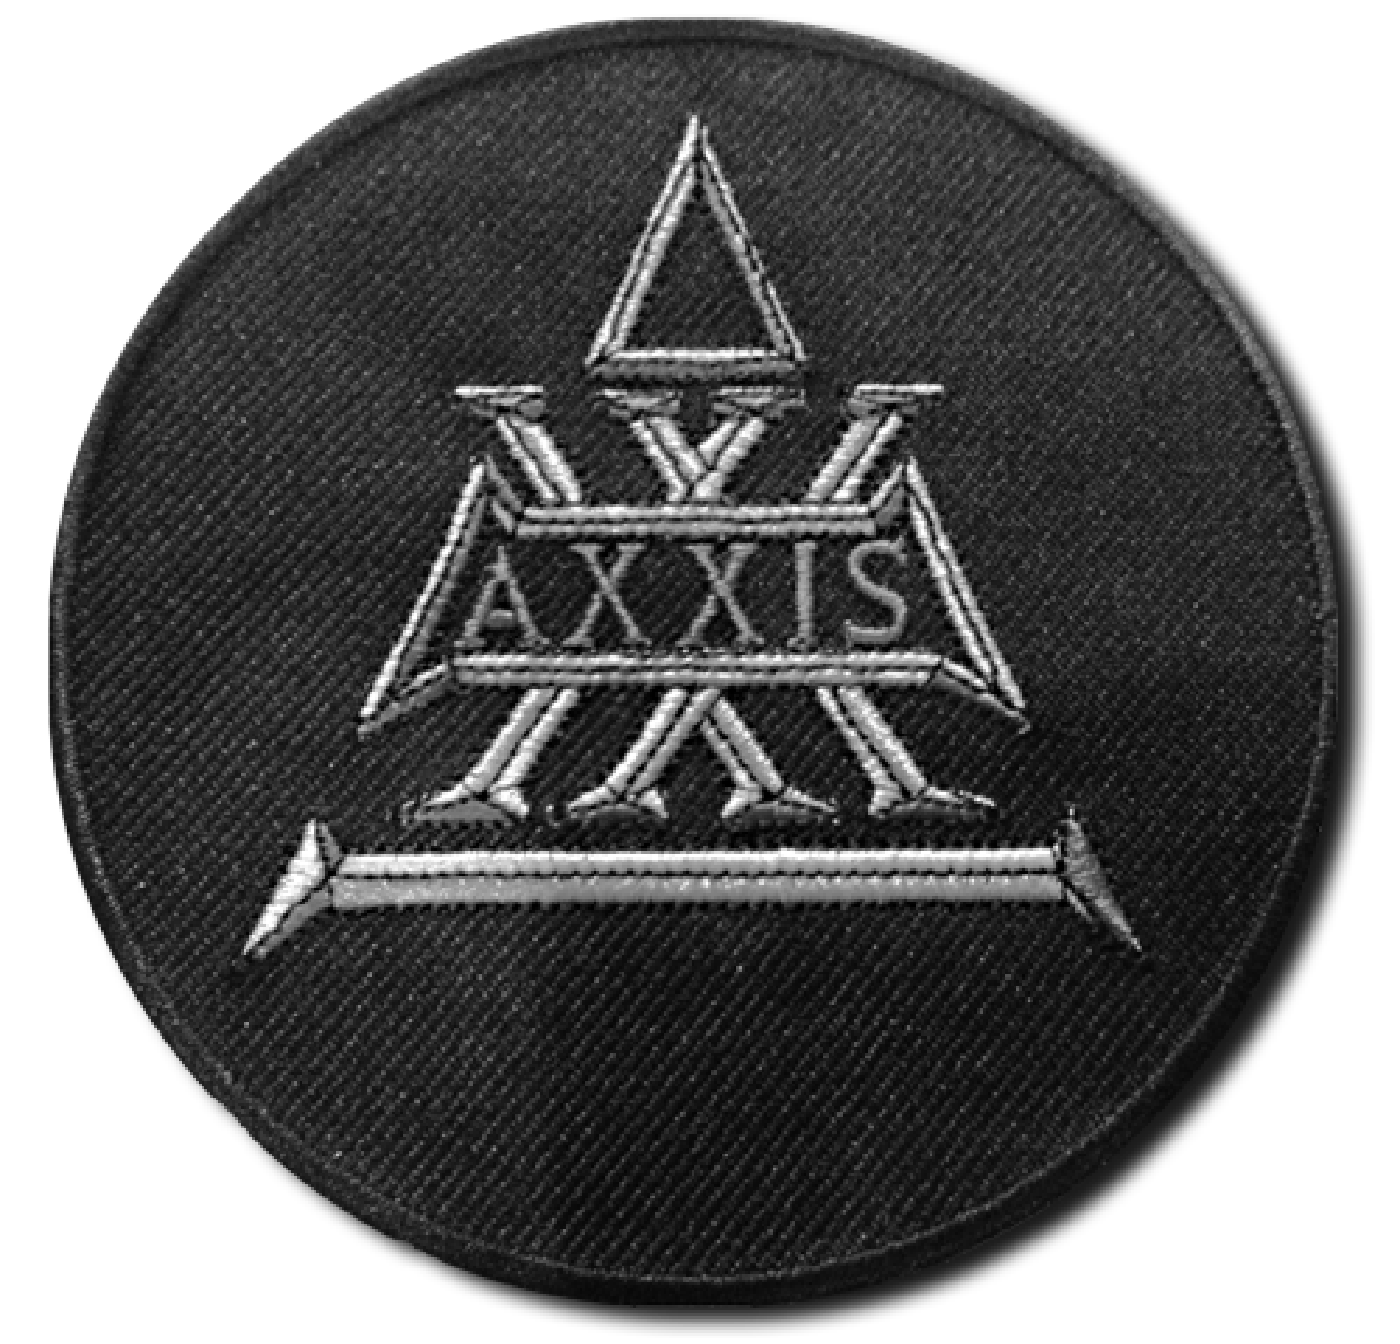 AXXIS patch